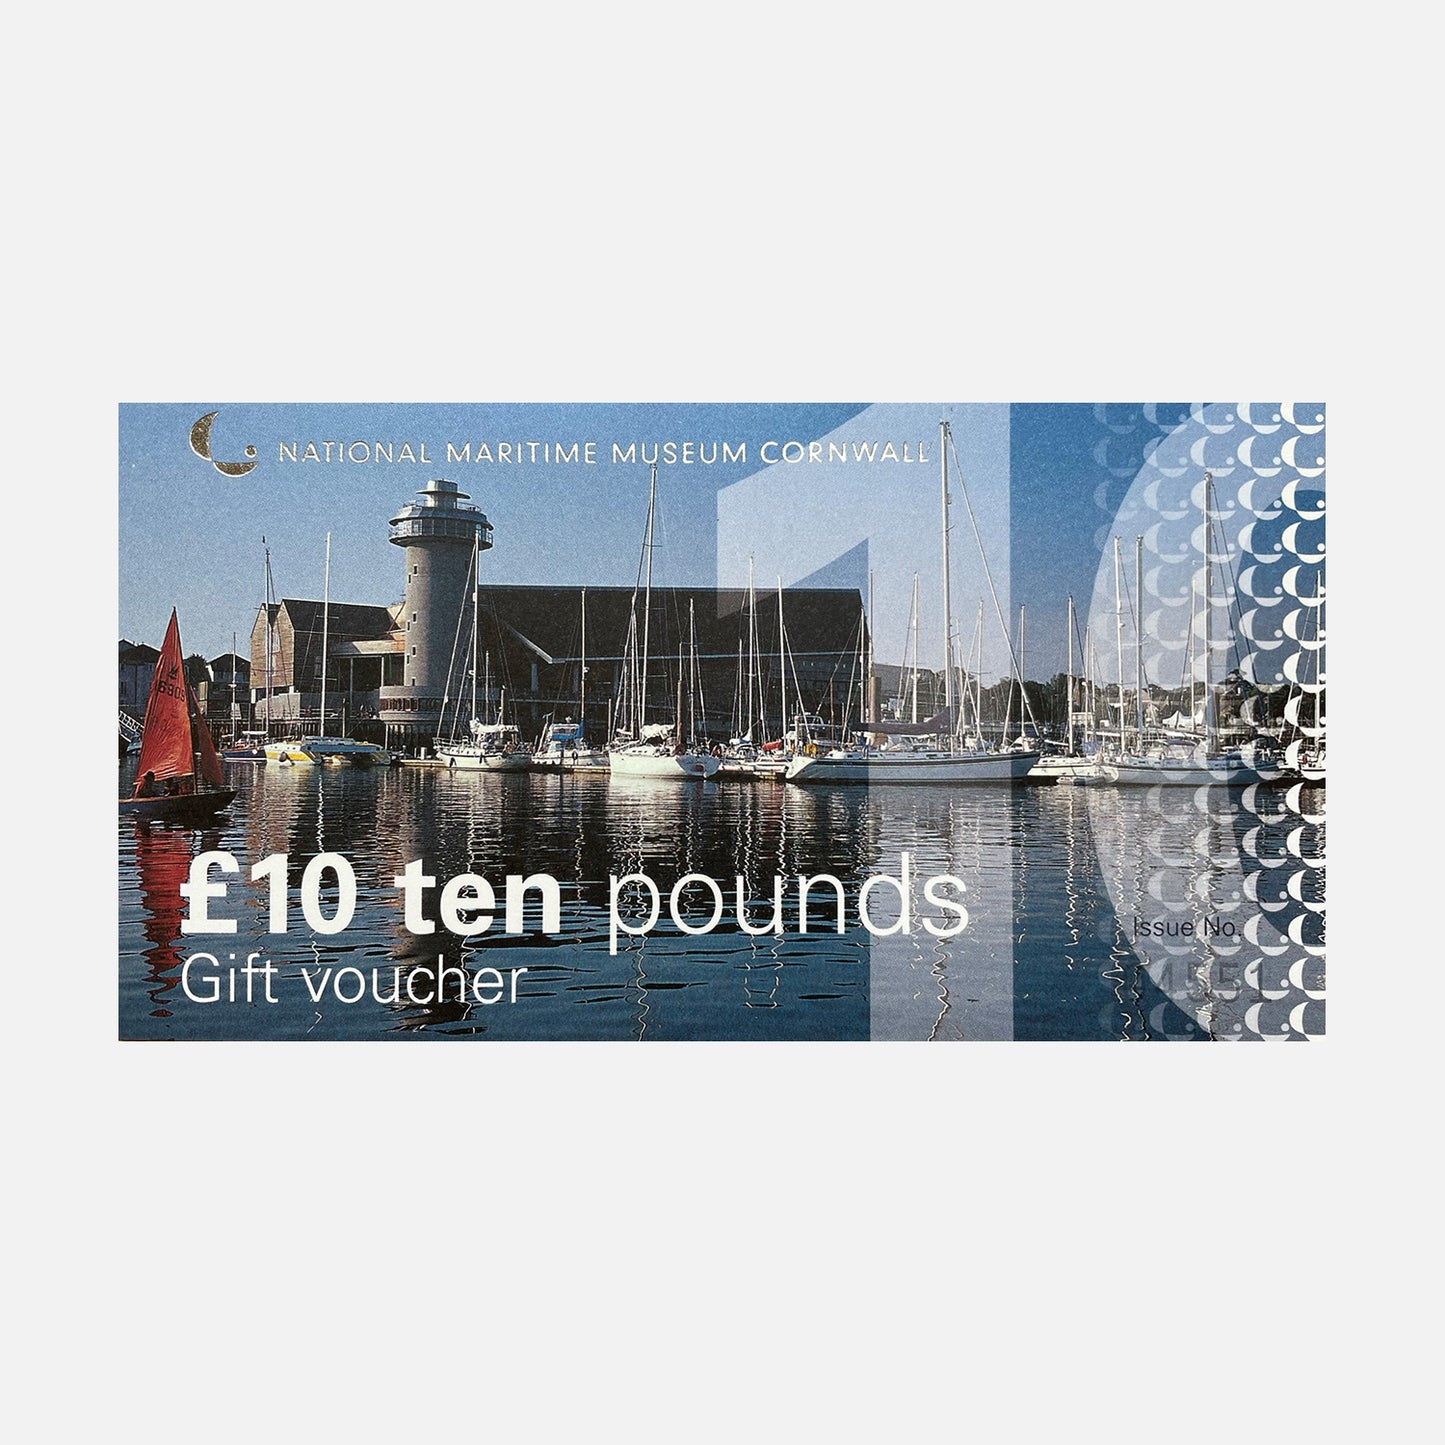 The Museum's £10 gift voucher showing a photograph of the building